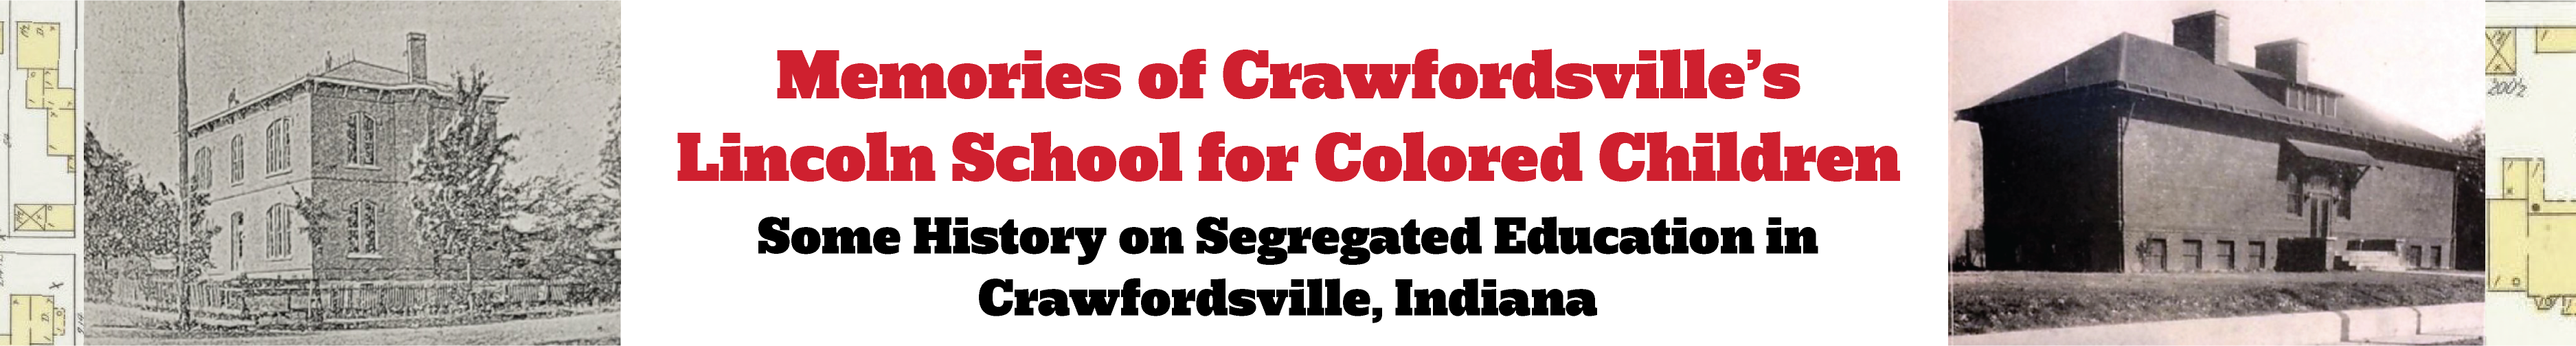 Memories of Crawfordsville's Lincoln School for Colored Children: Some History on Segregated Education in Crawfordsville, Indiana